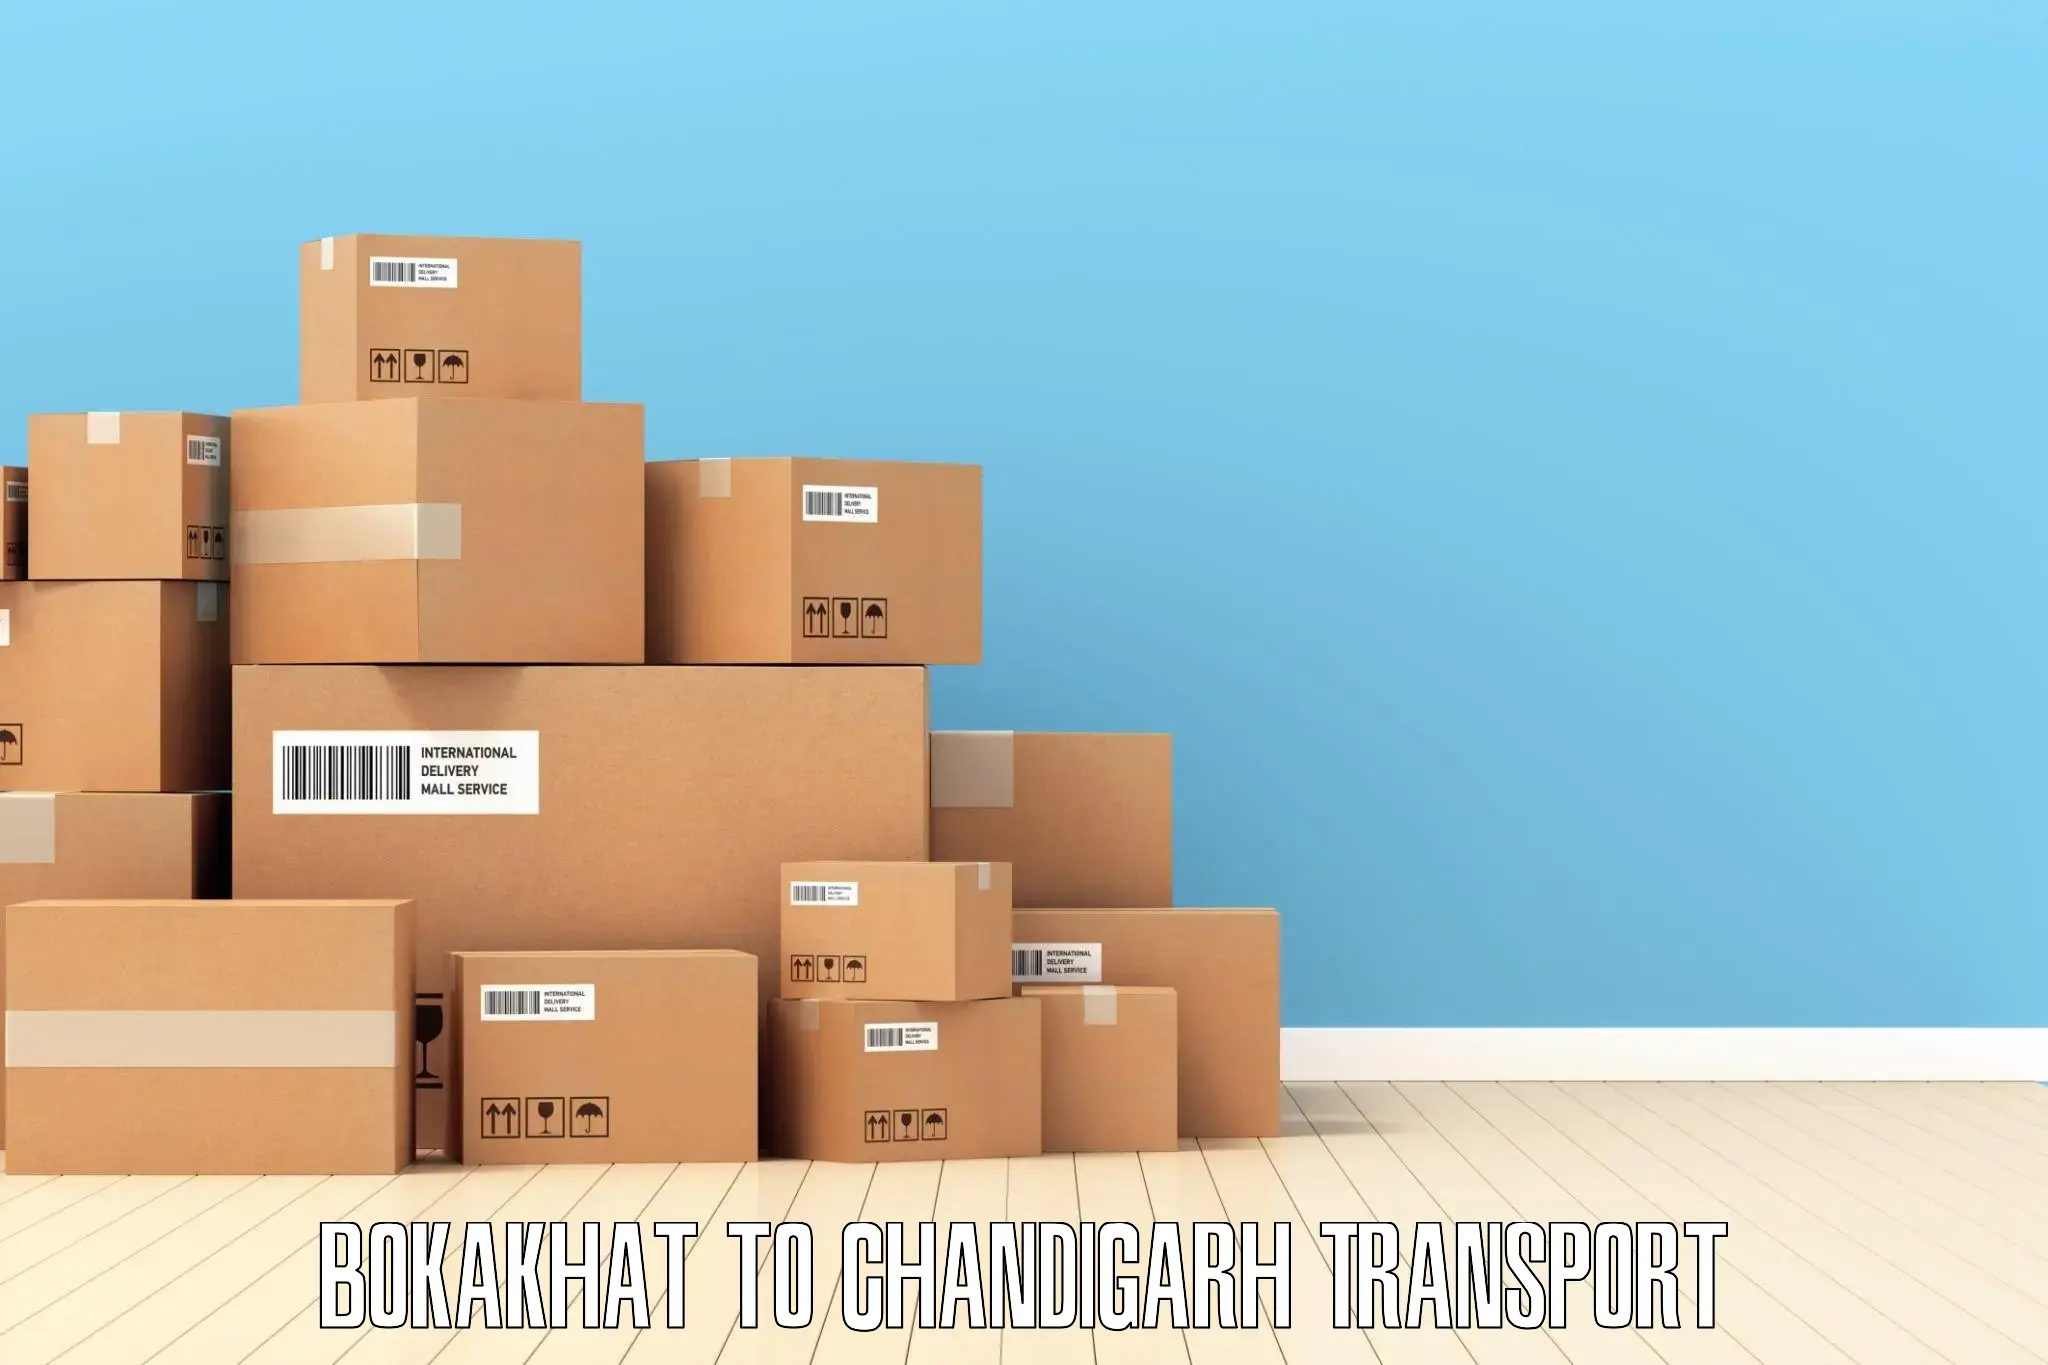 Truck transport companies in India in Bokakhat to Chandigarh